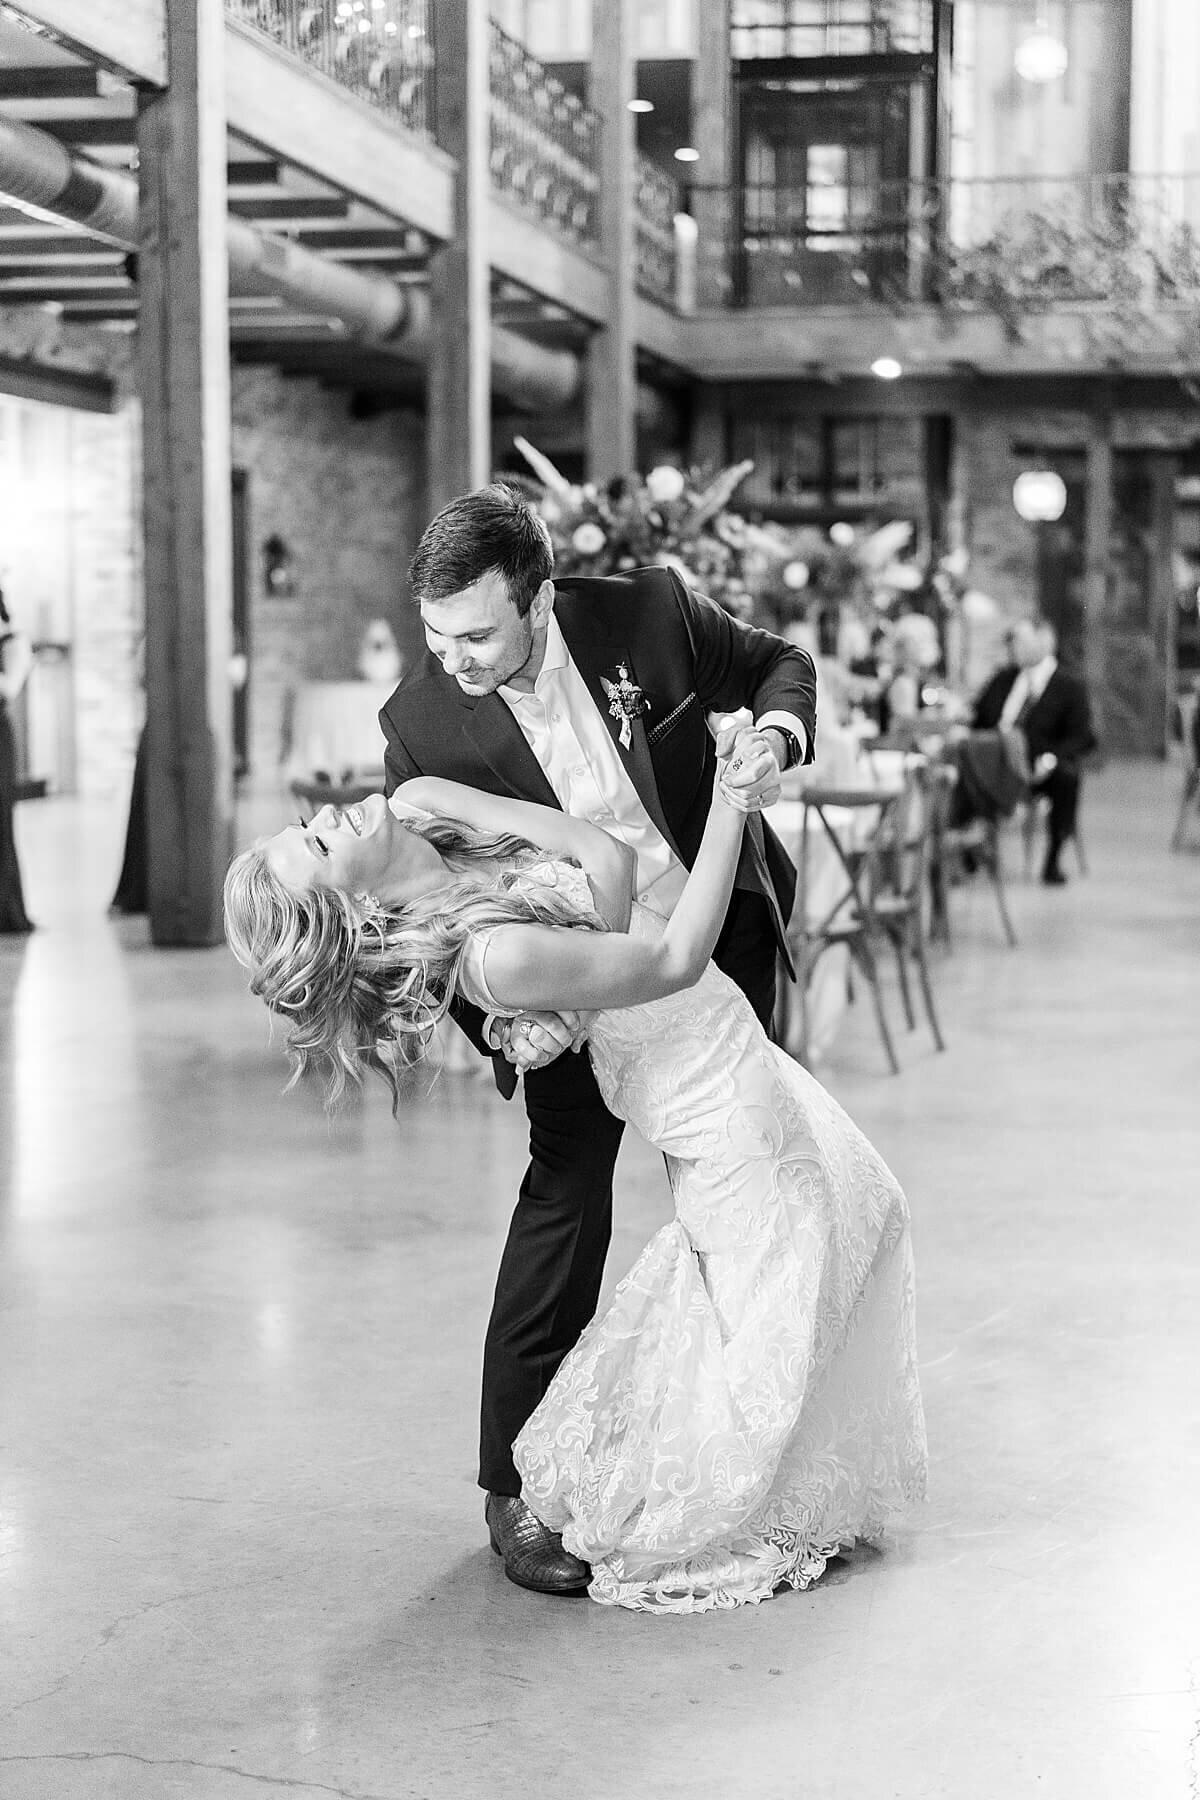 Wedding Reception - First Dance  at the Weinberg at Wixon Valley in Bryan Texas photographed by Alicia Yarrish Photography